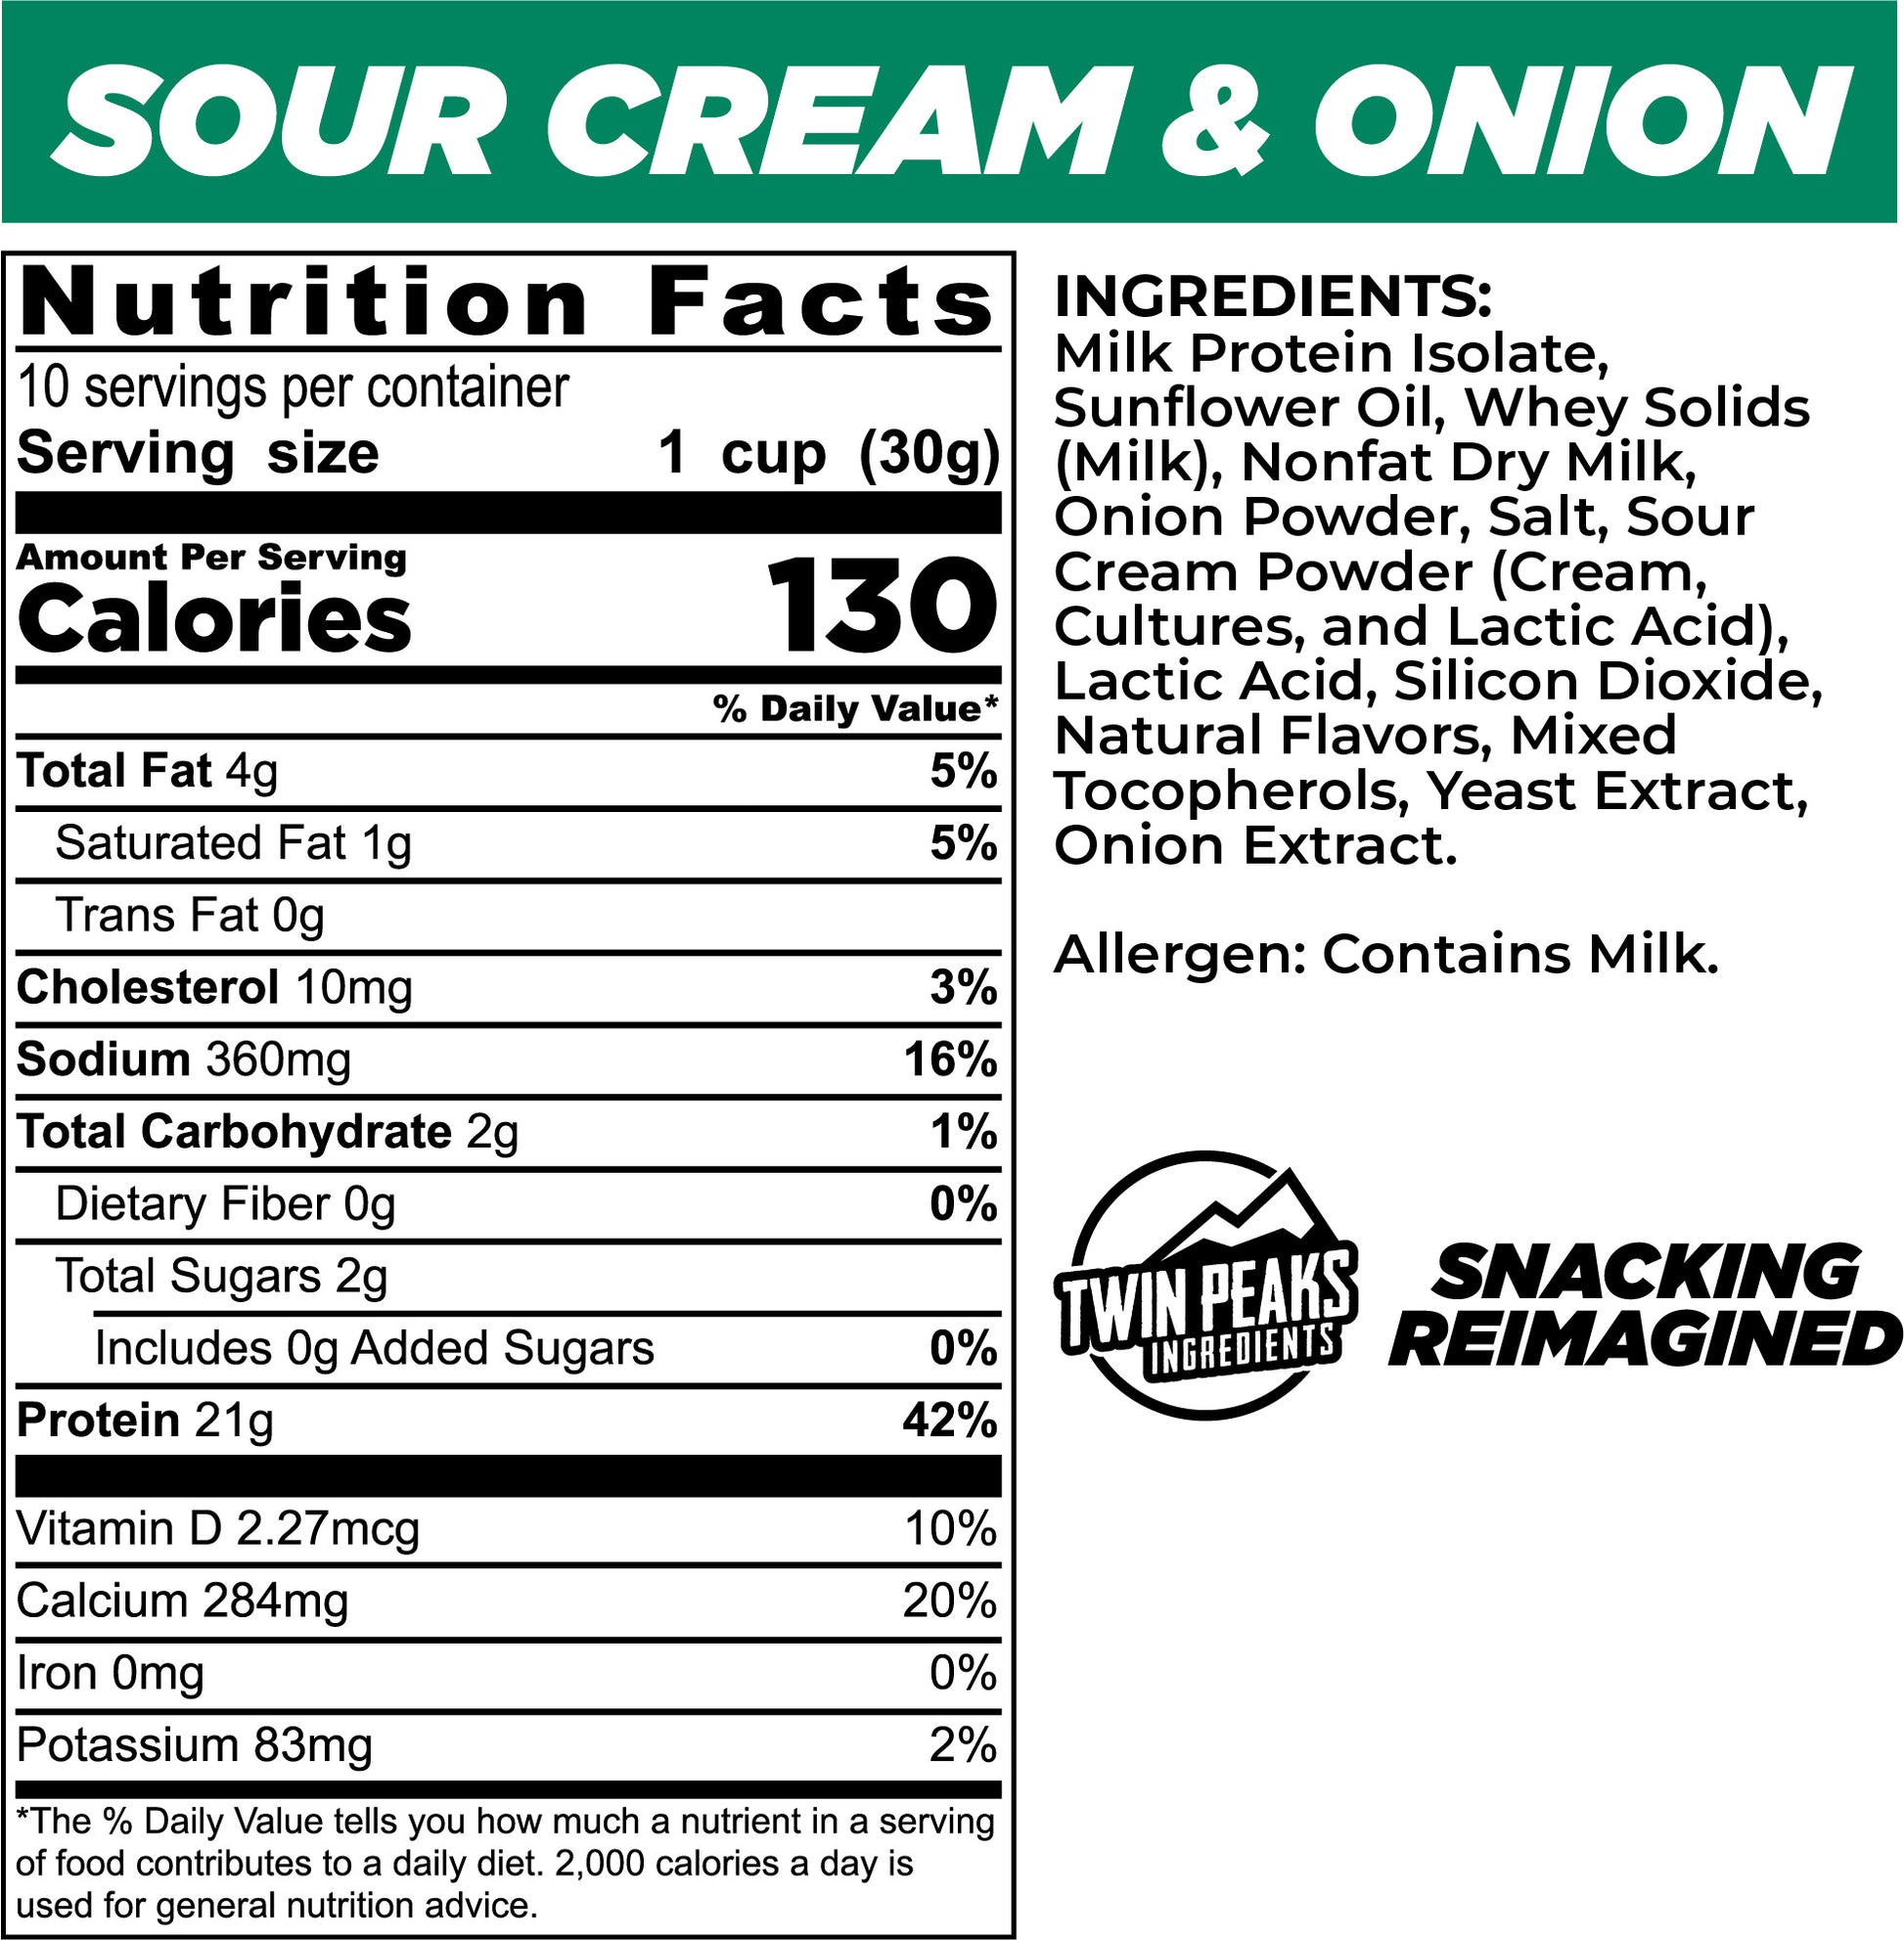 Sour Cream & Onion Nutrition facts and Ingredients 